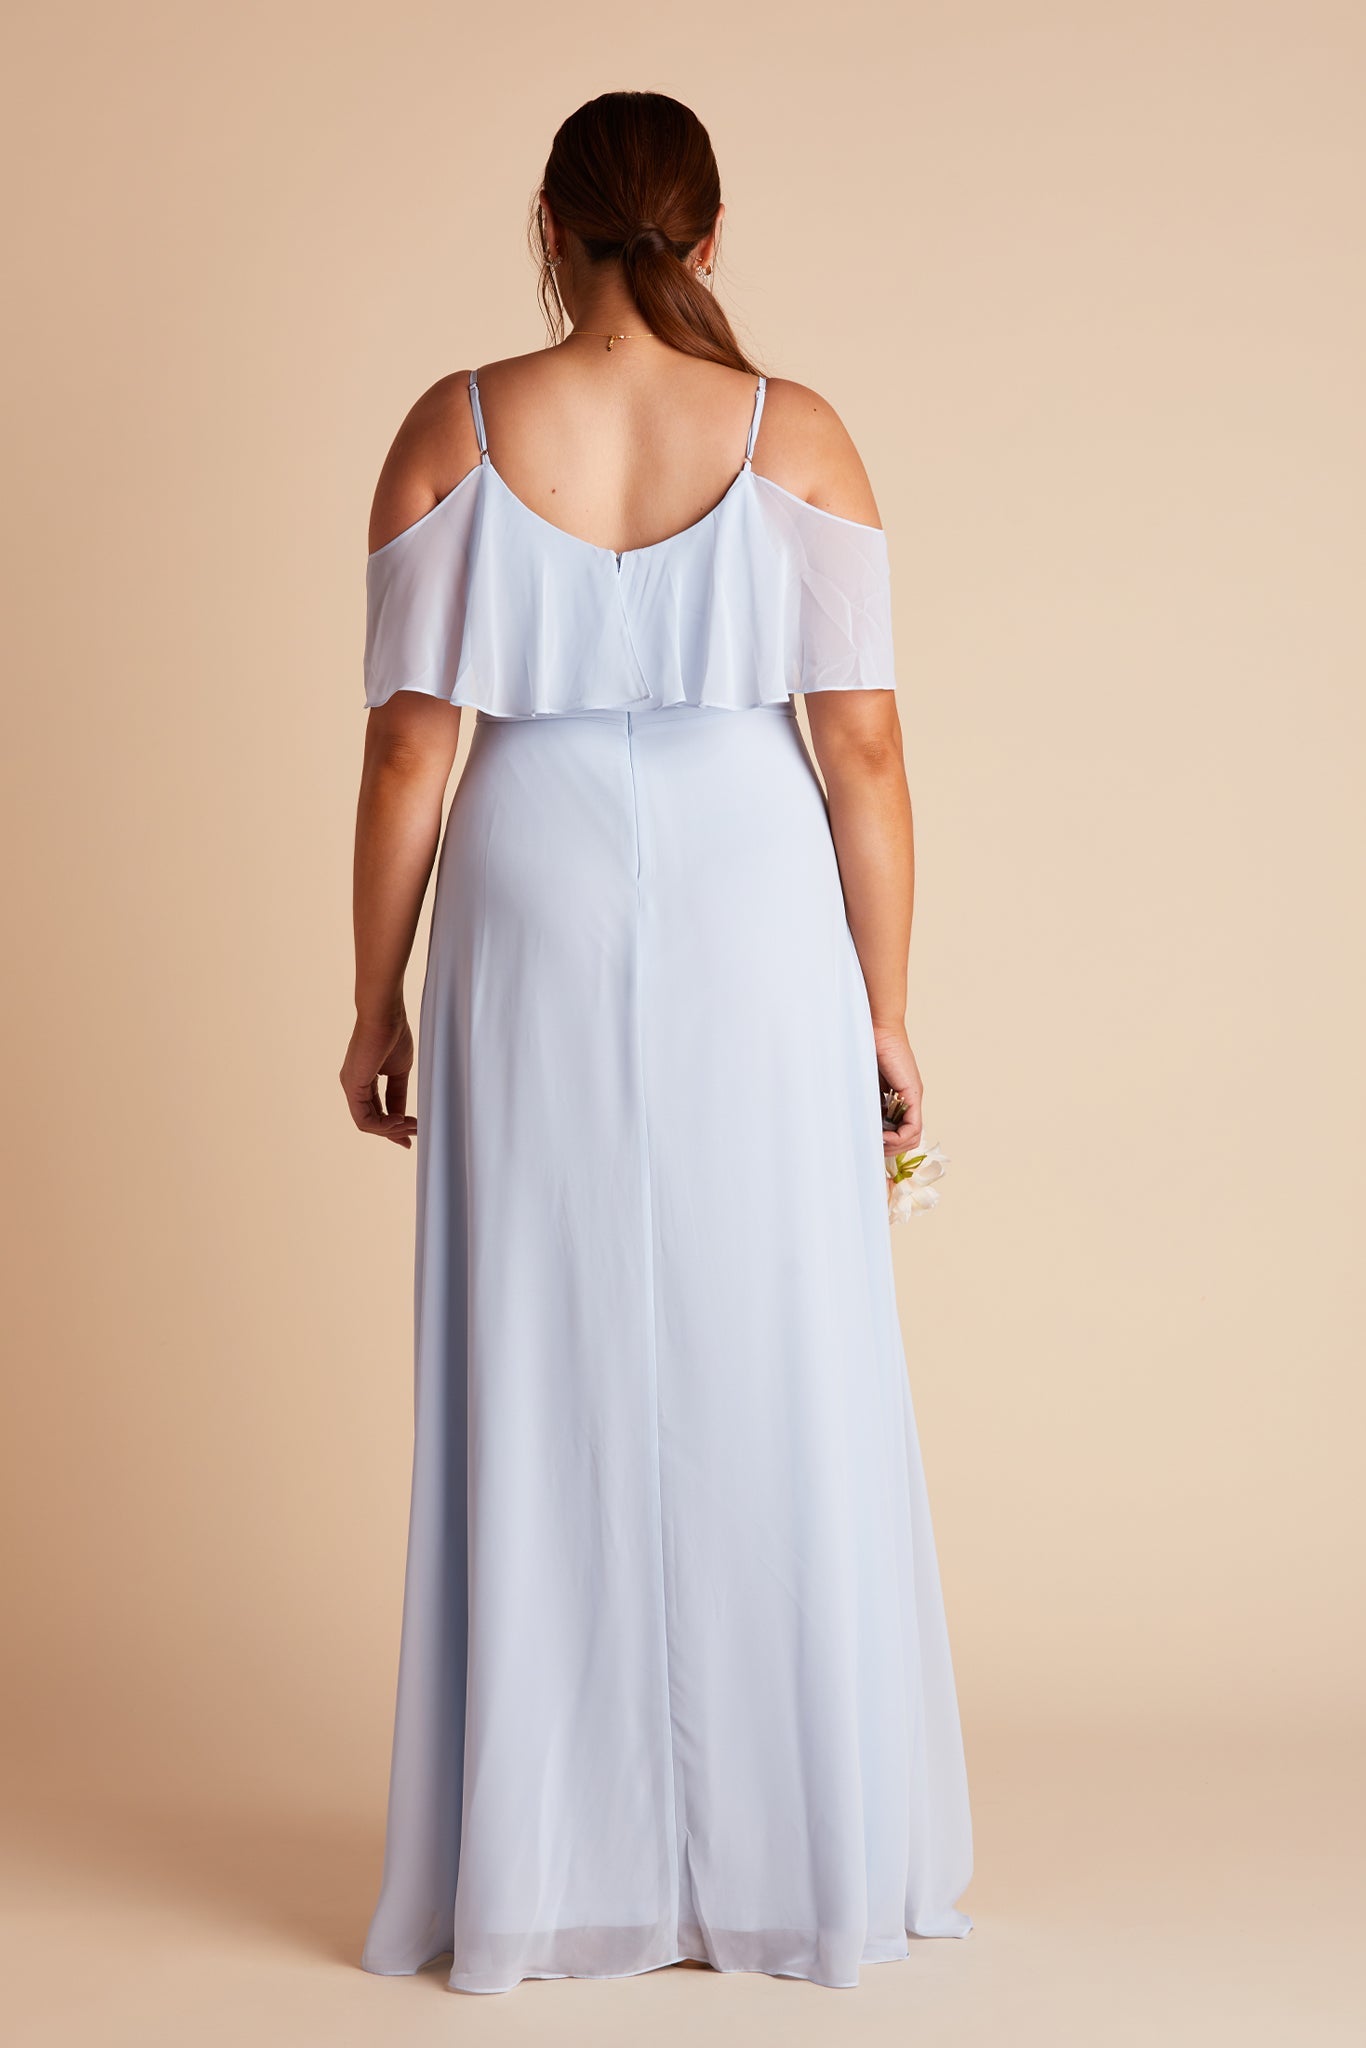 Jane convertible plus size bridesmaid dress with slit in ice blue chiffon by Birdy Grey, back view